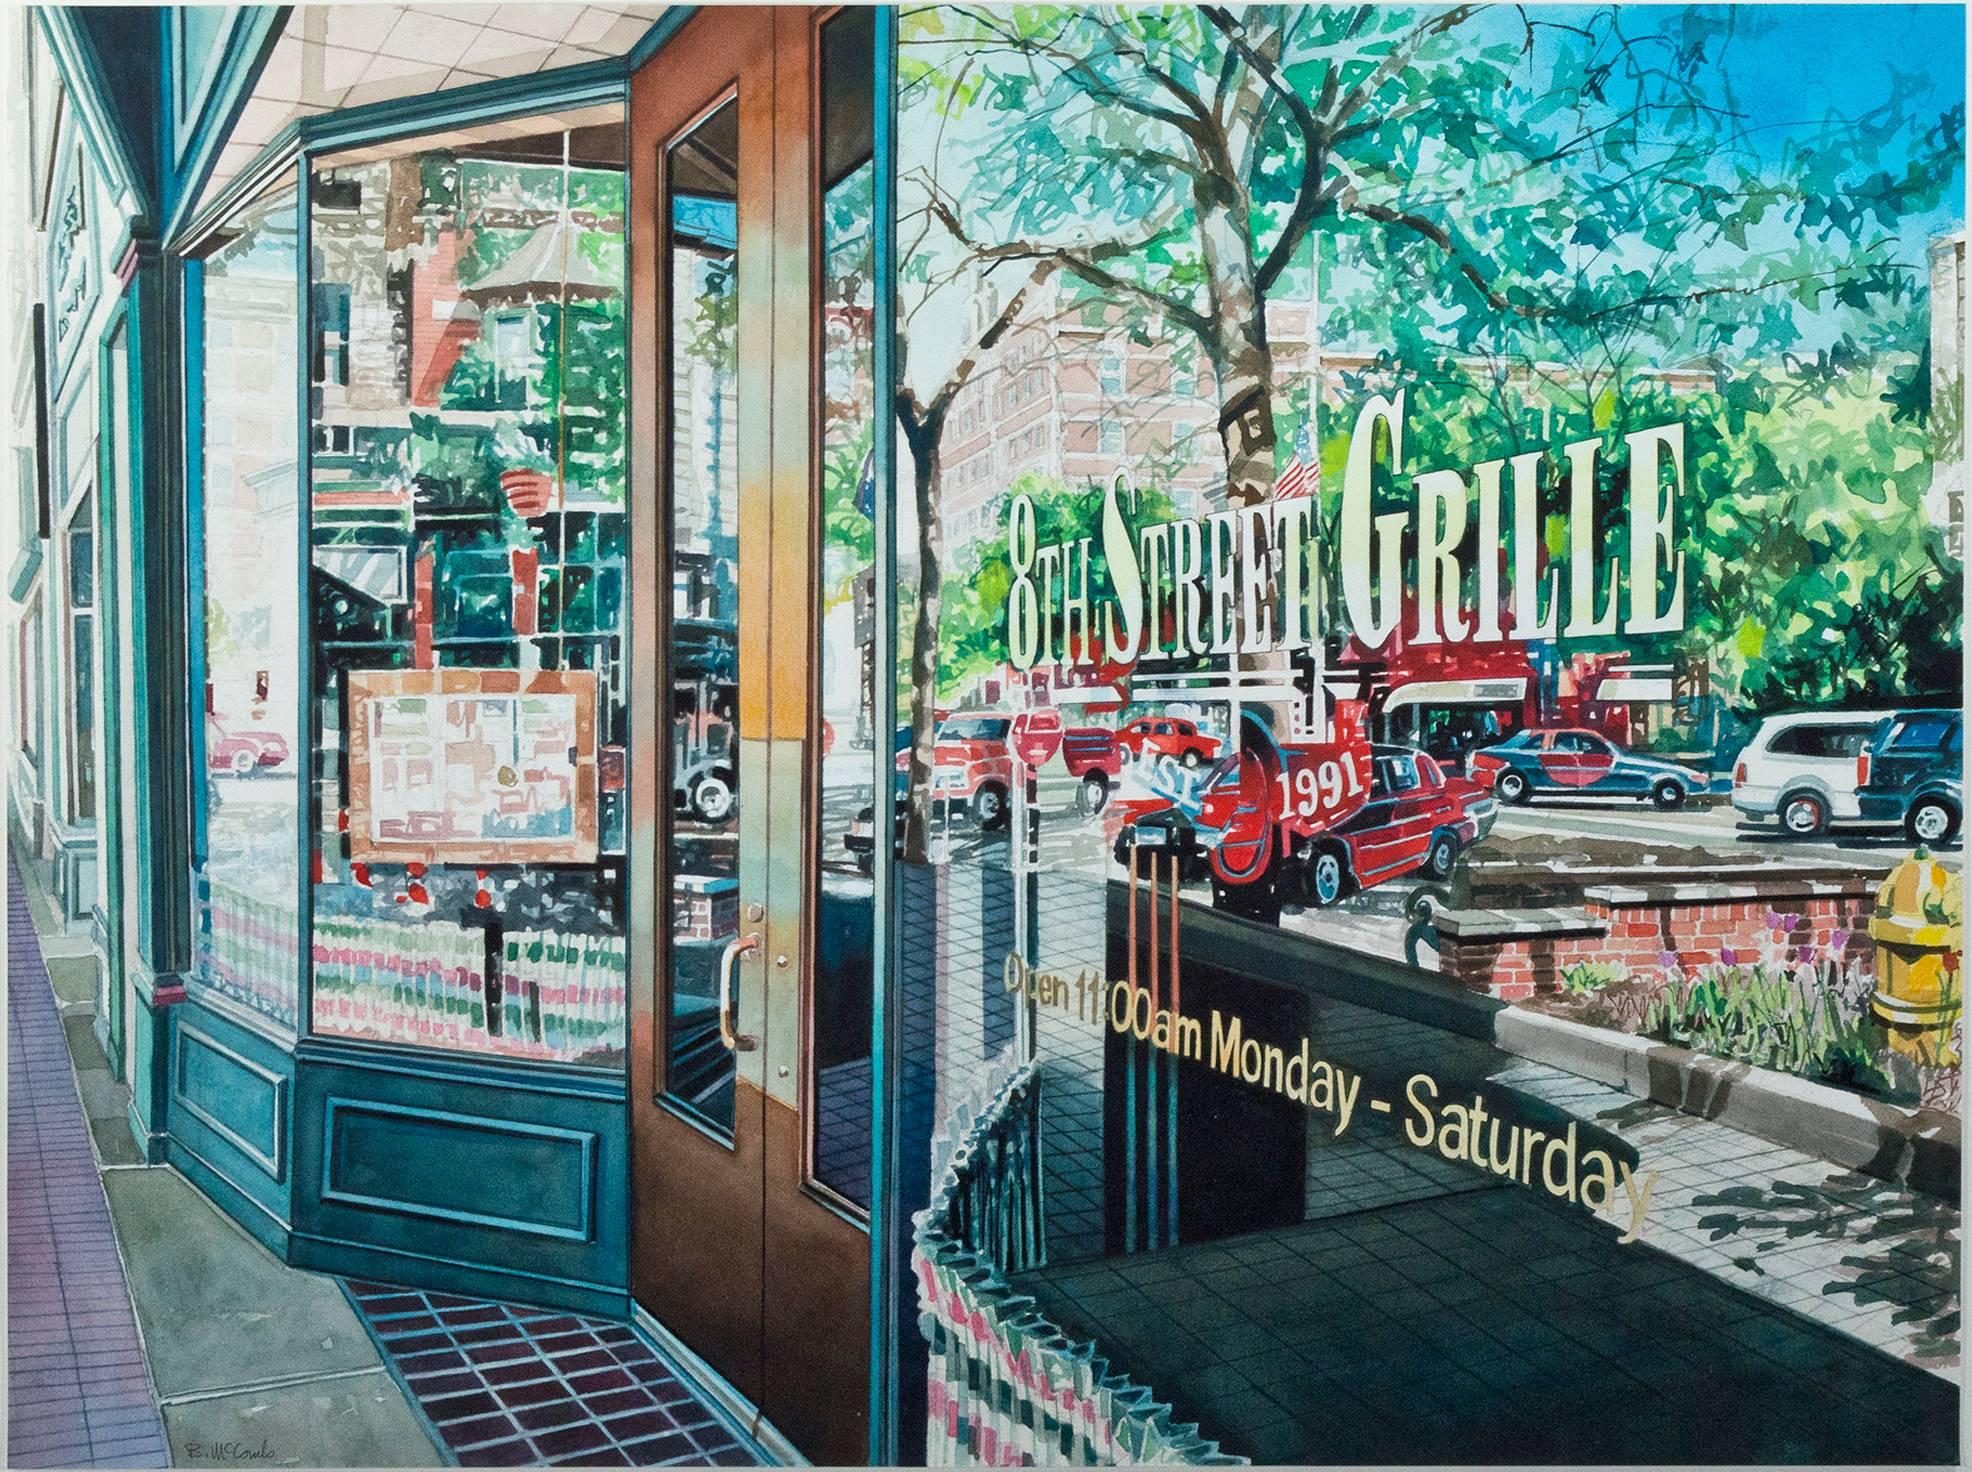 "Reflections 8th Street Grille" is an original signed watercolor by Bruce McCombs. It depicts the storefront window of a cafe. This view does not allow the viewer to see much of the interior--rather, they see the brightly sunlit street behind them.